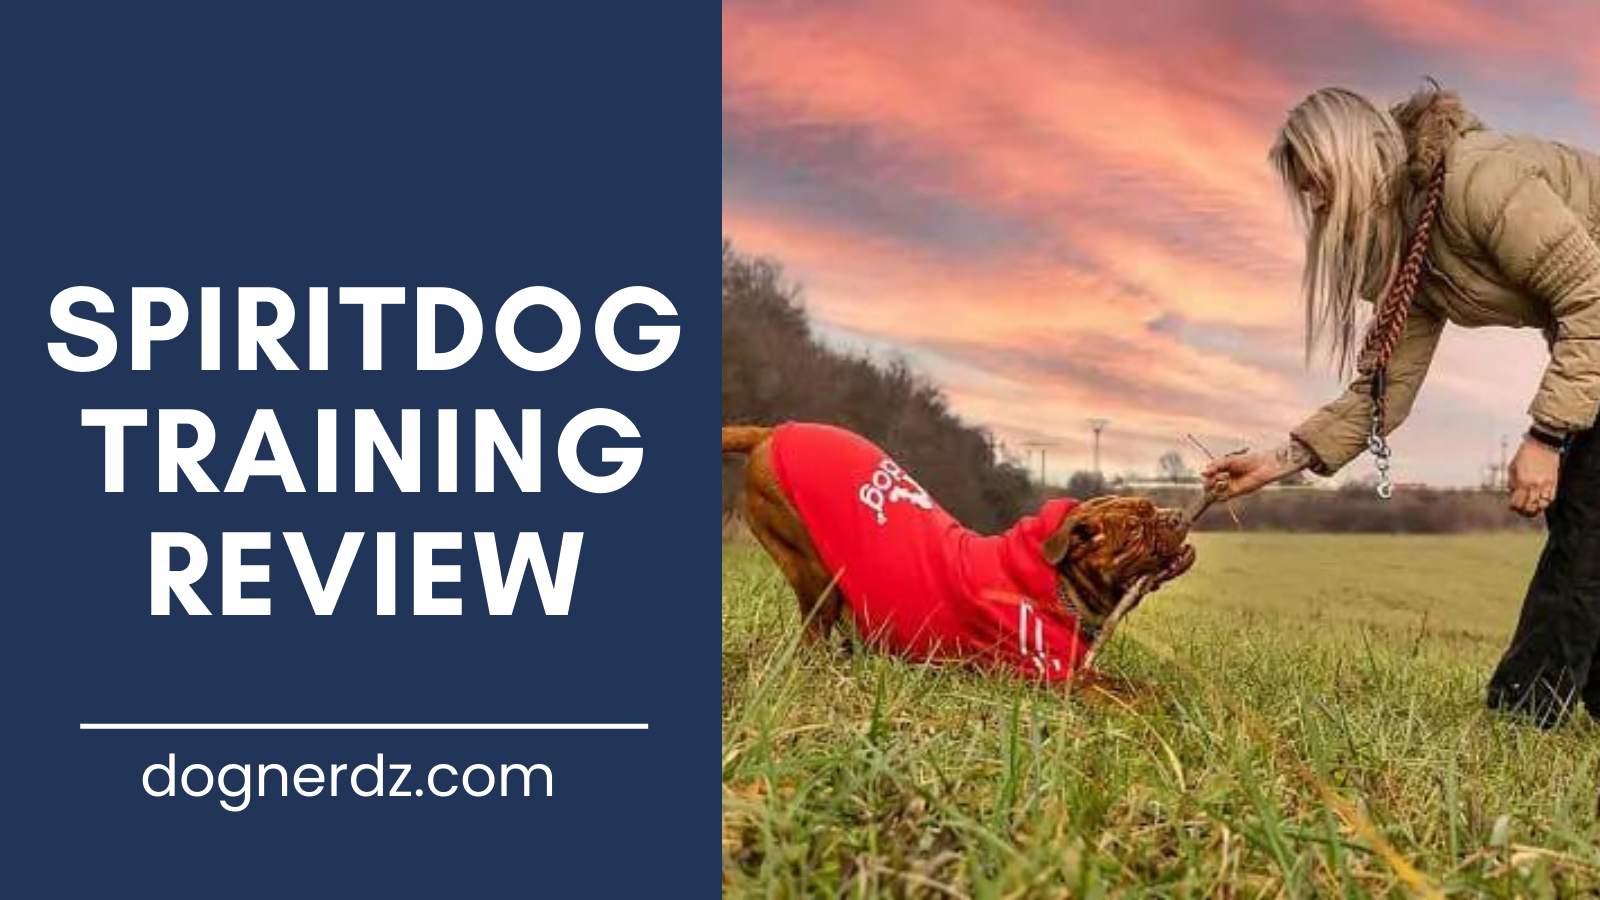 review of the best spiritdog training and how to become the top dog with spiritdog training